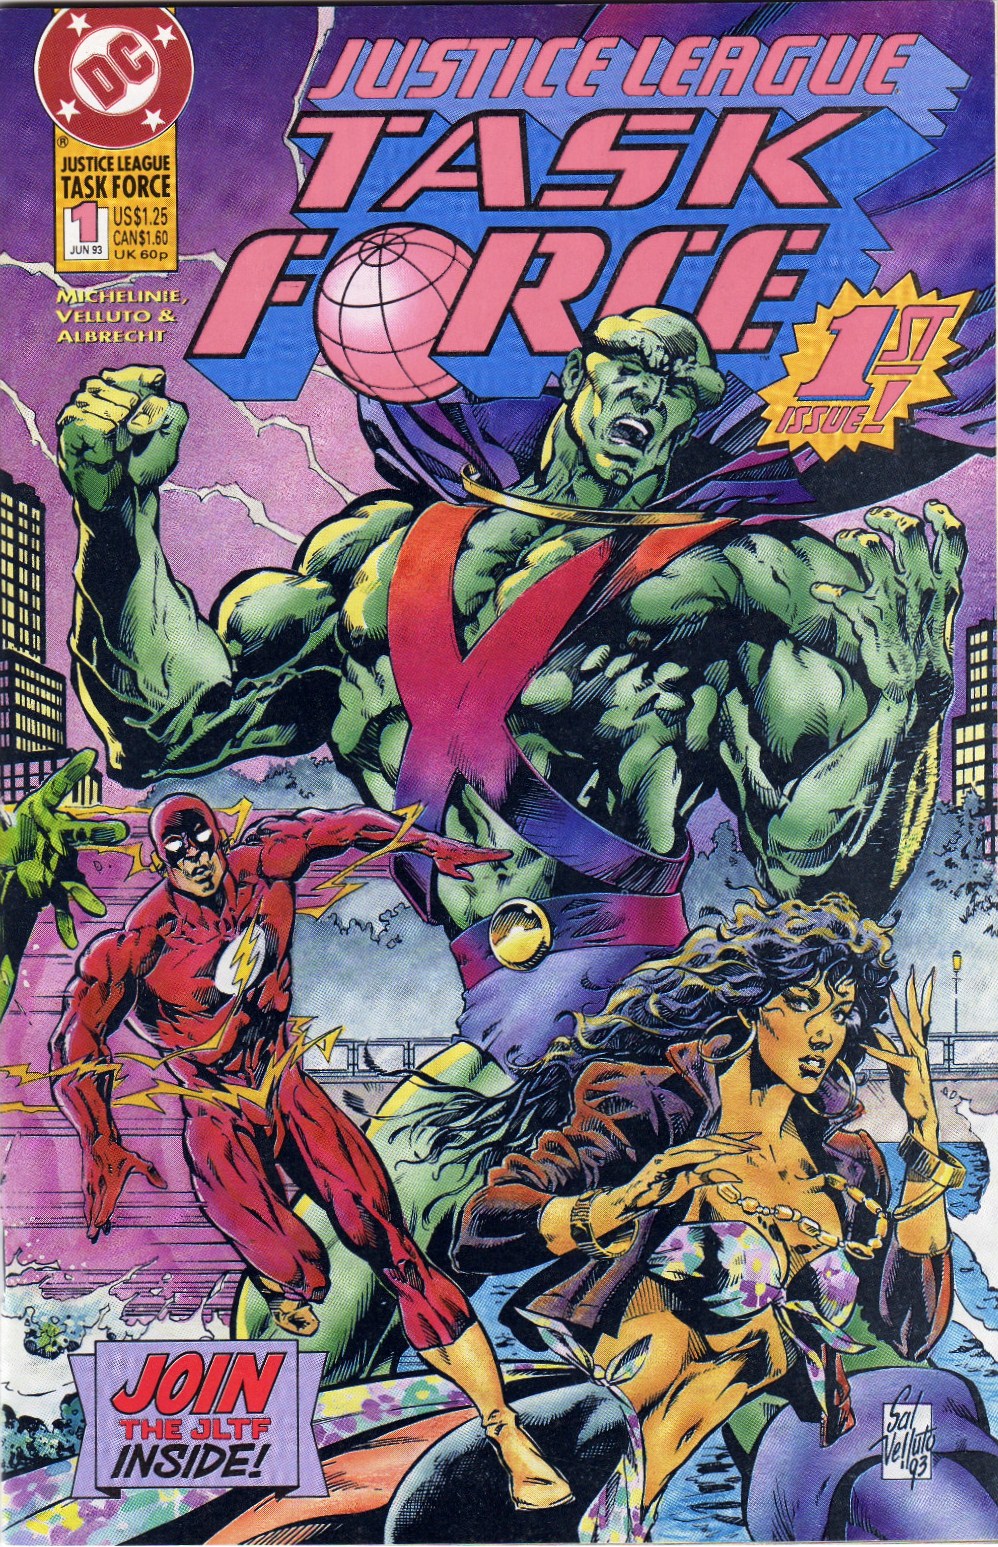 Justice-League-Task-Force-1-1993-Cover.jpg